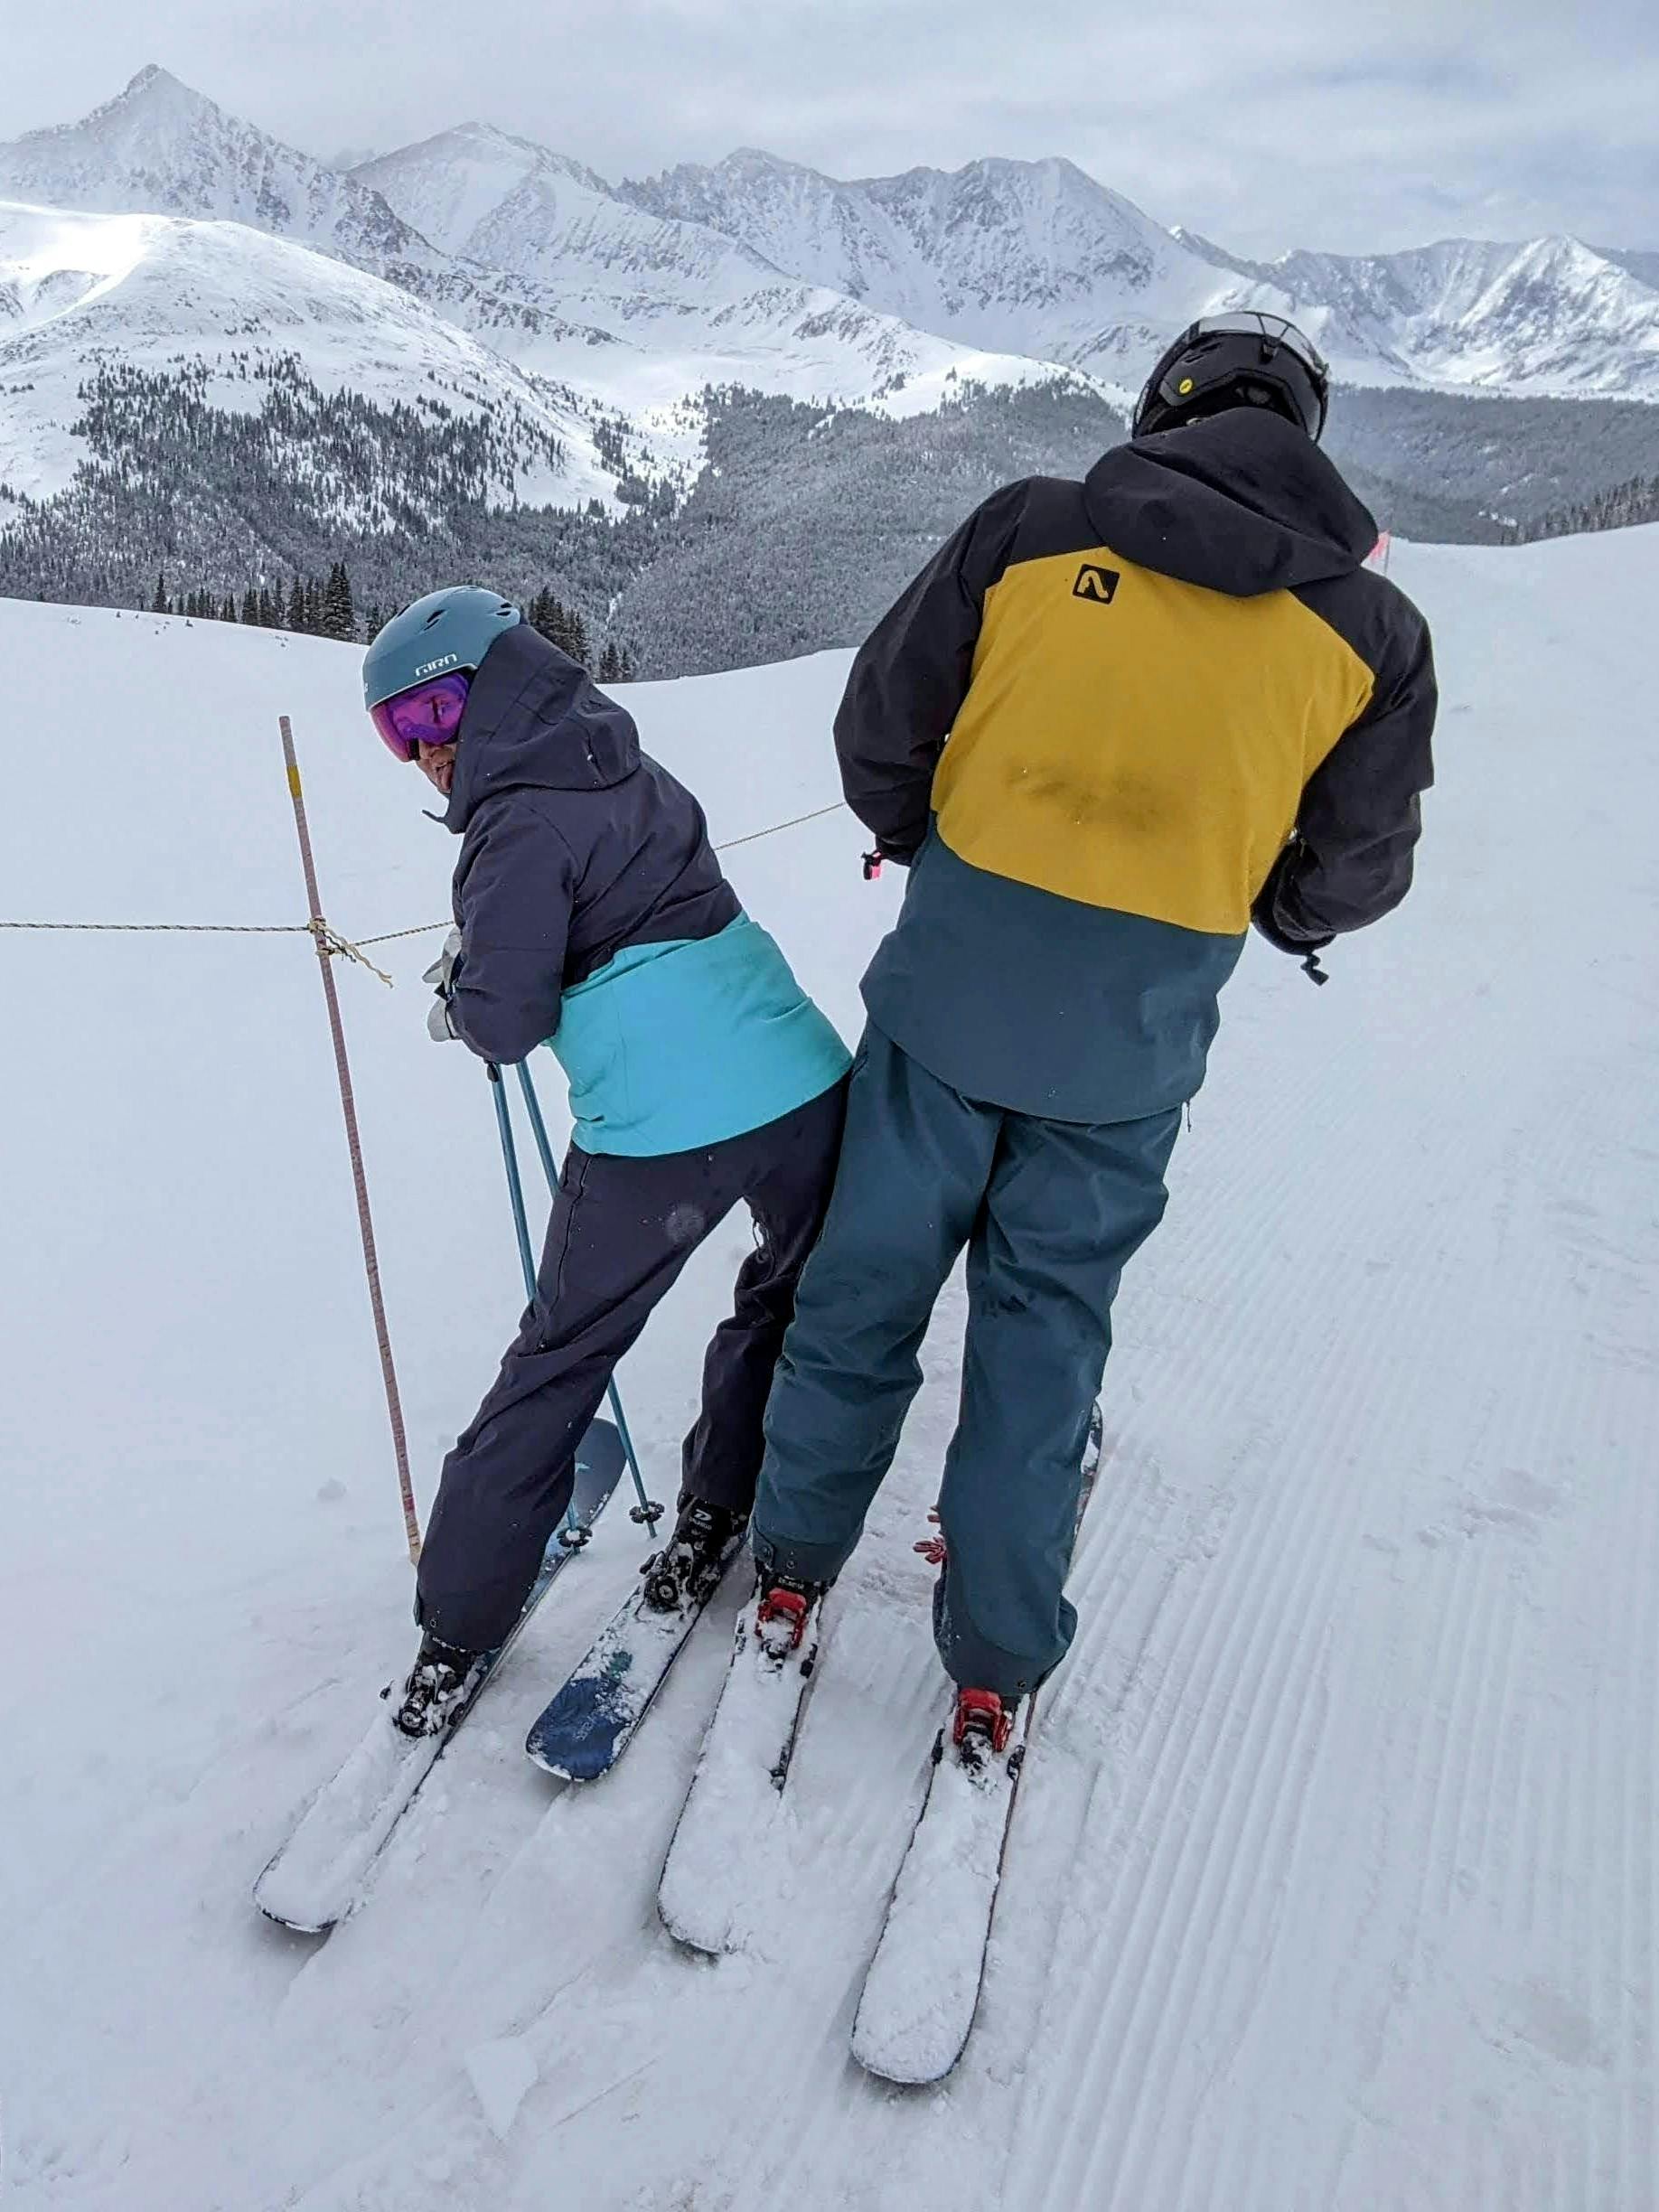 Two skiers standing at the top of a snowy ski run. There are snow capped mountains in the background. 